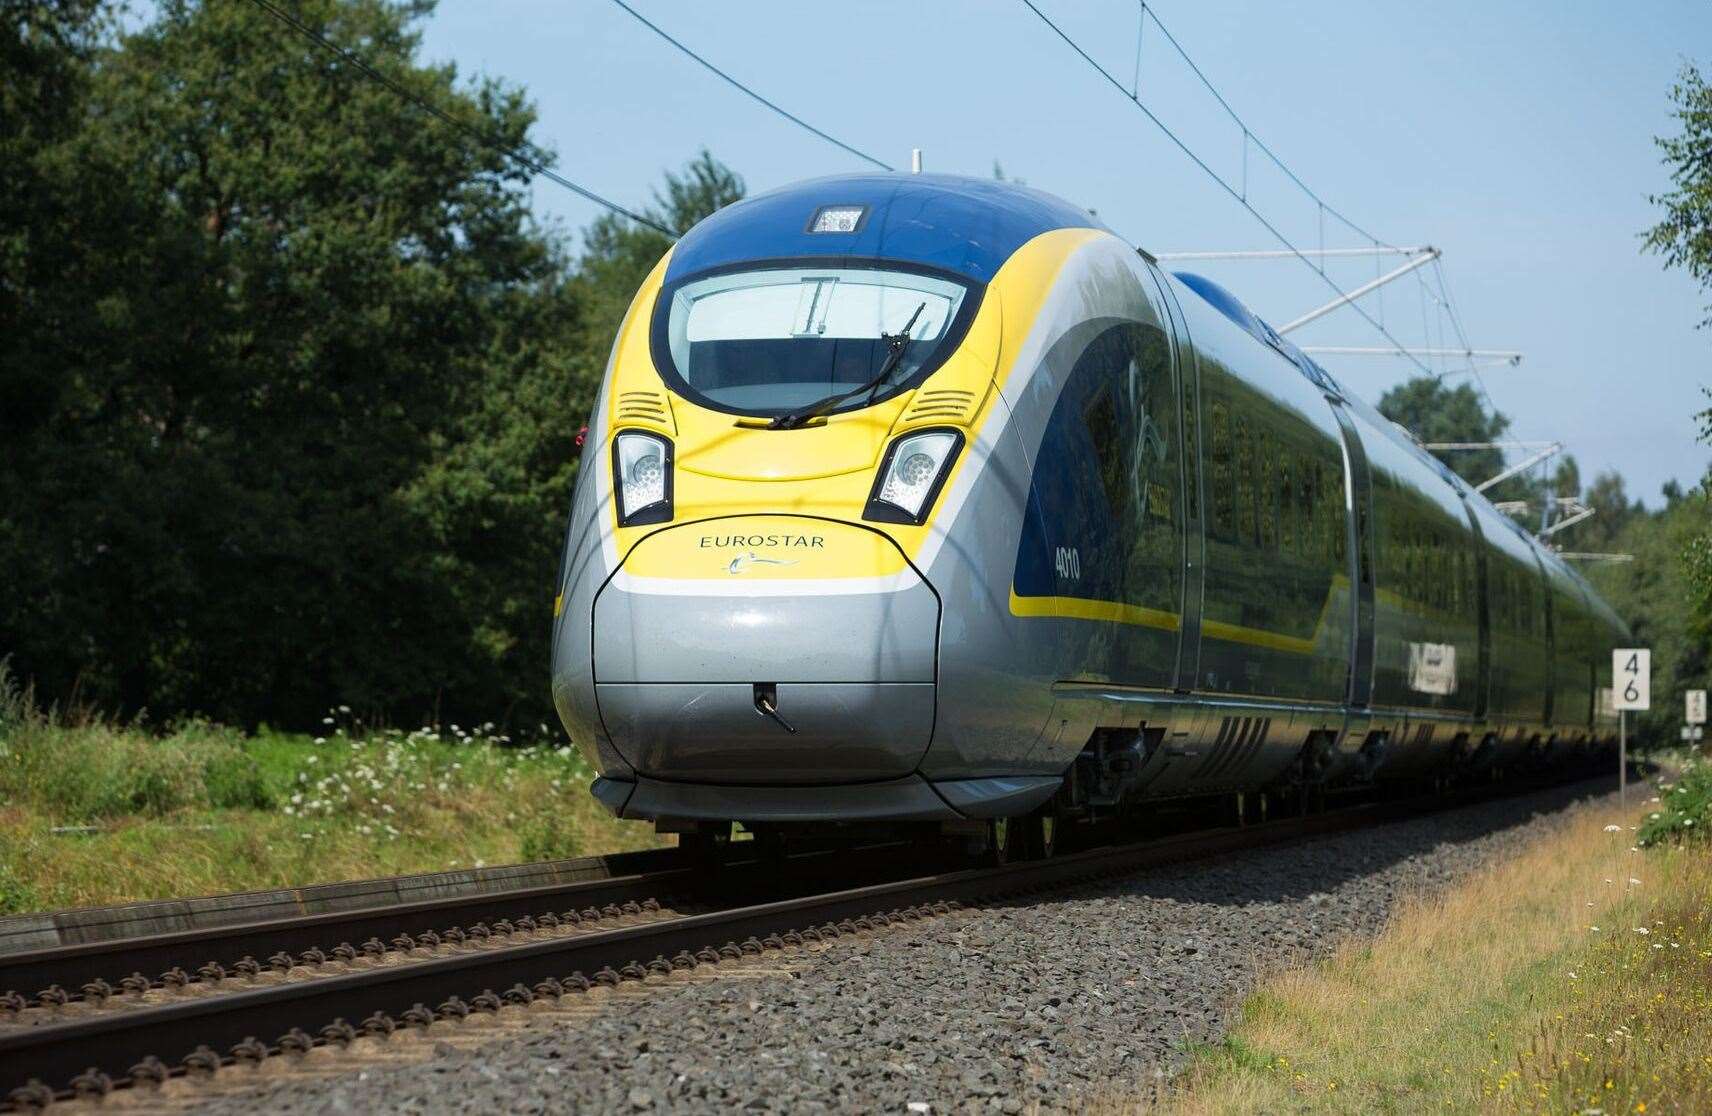 Eurostar services will now not return to Kent until 2023